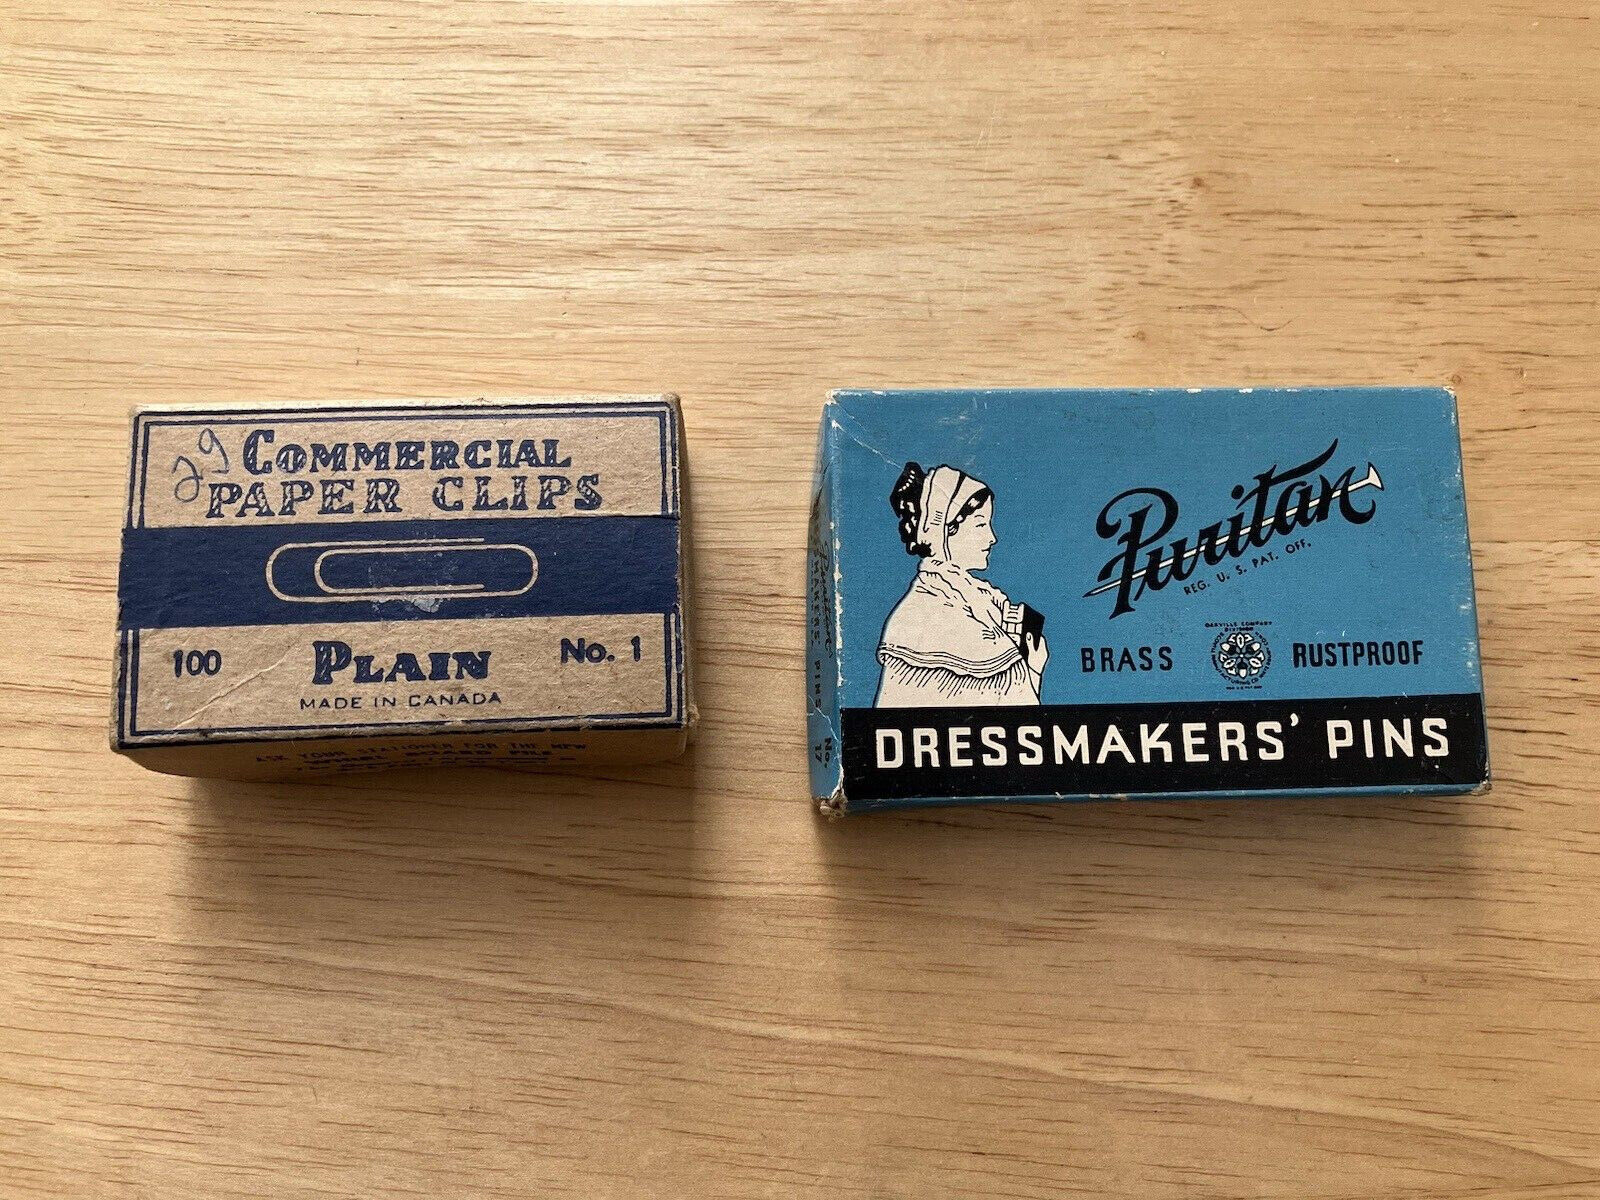 Vintage boxes -  Puritan Dressmakers Pins and Commercial Paper Clips 